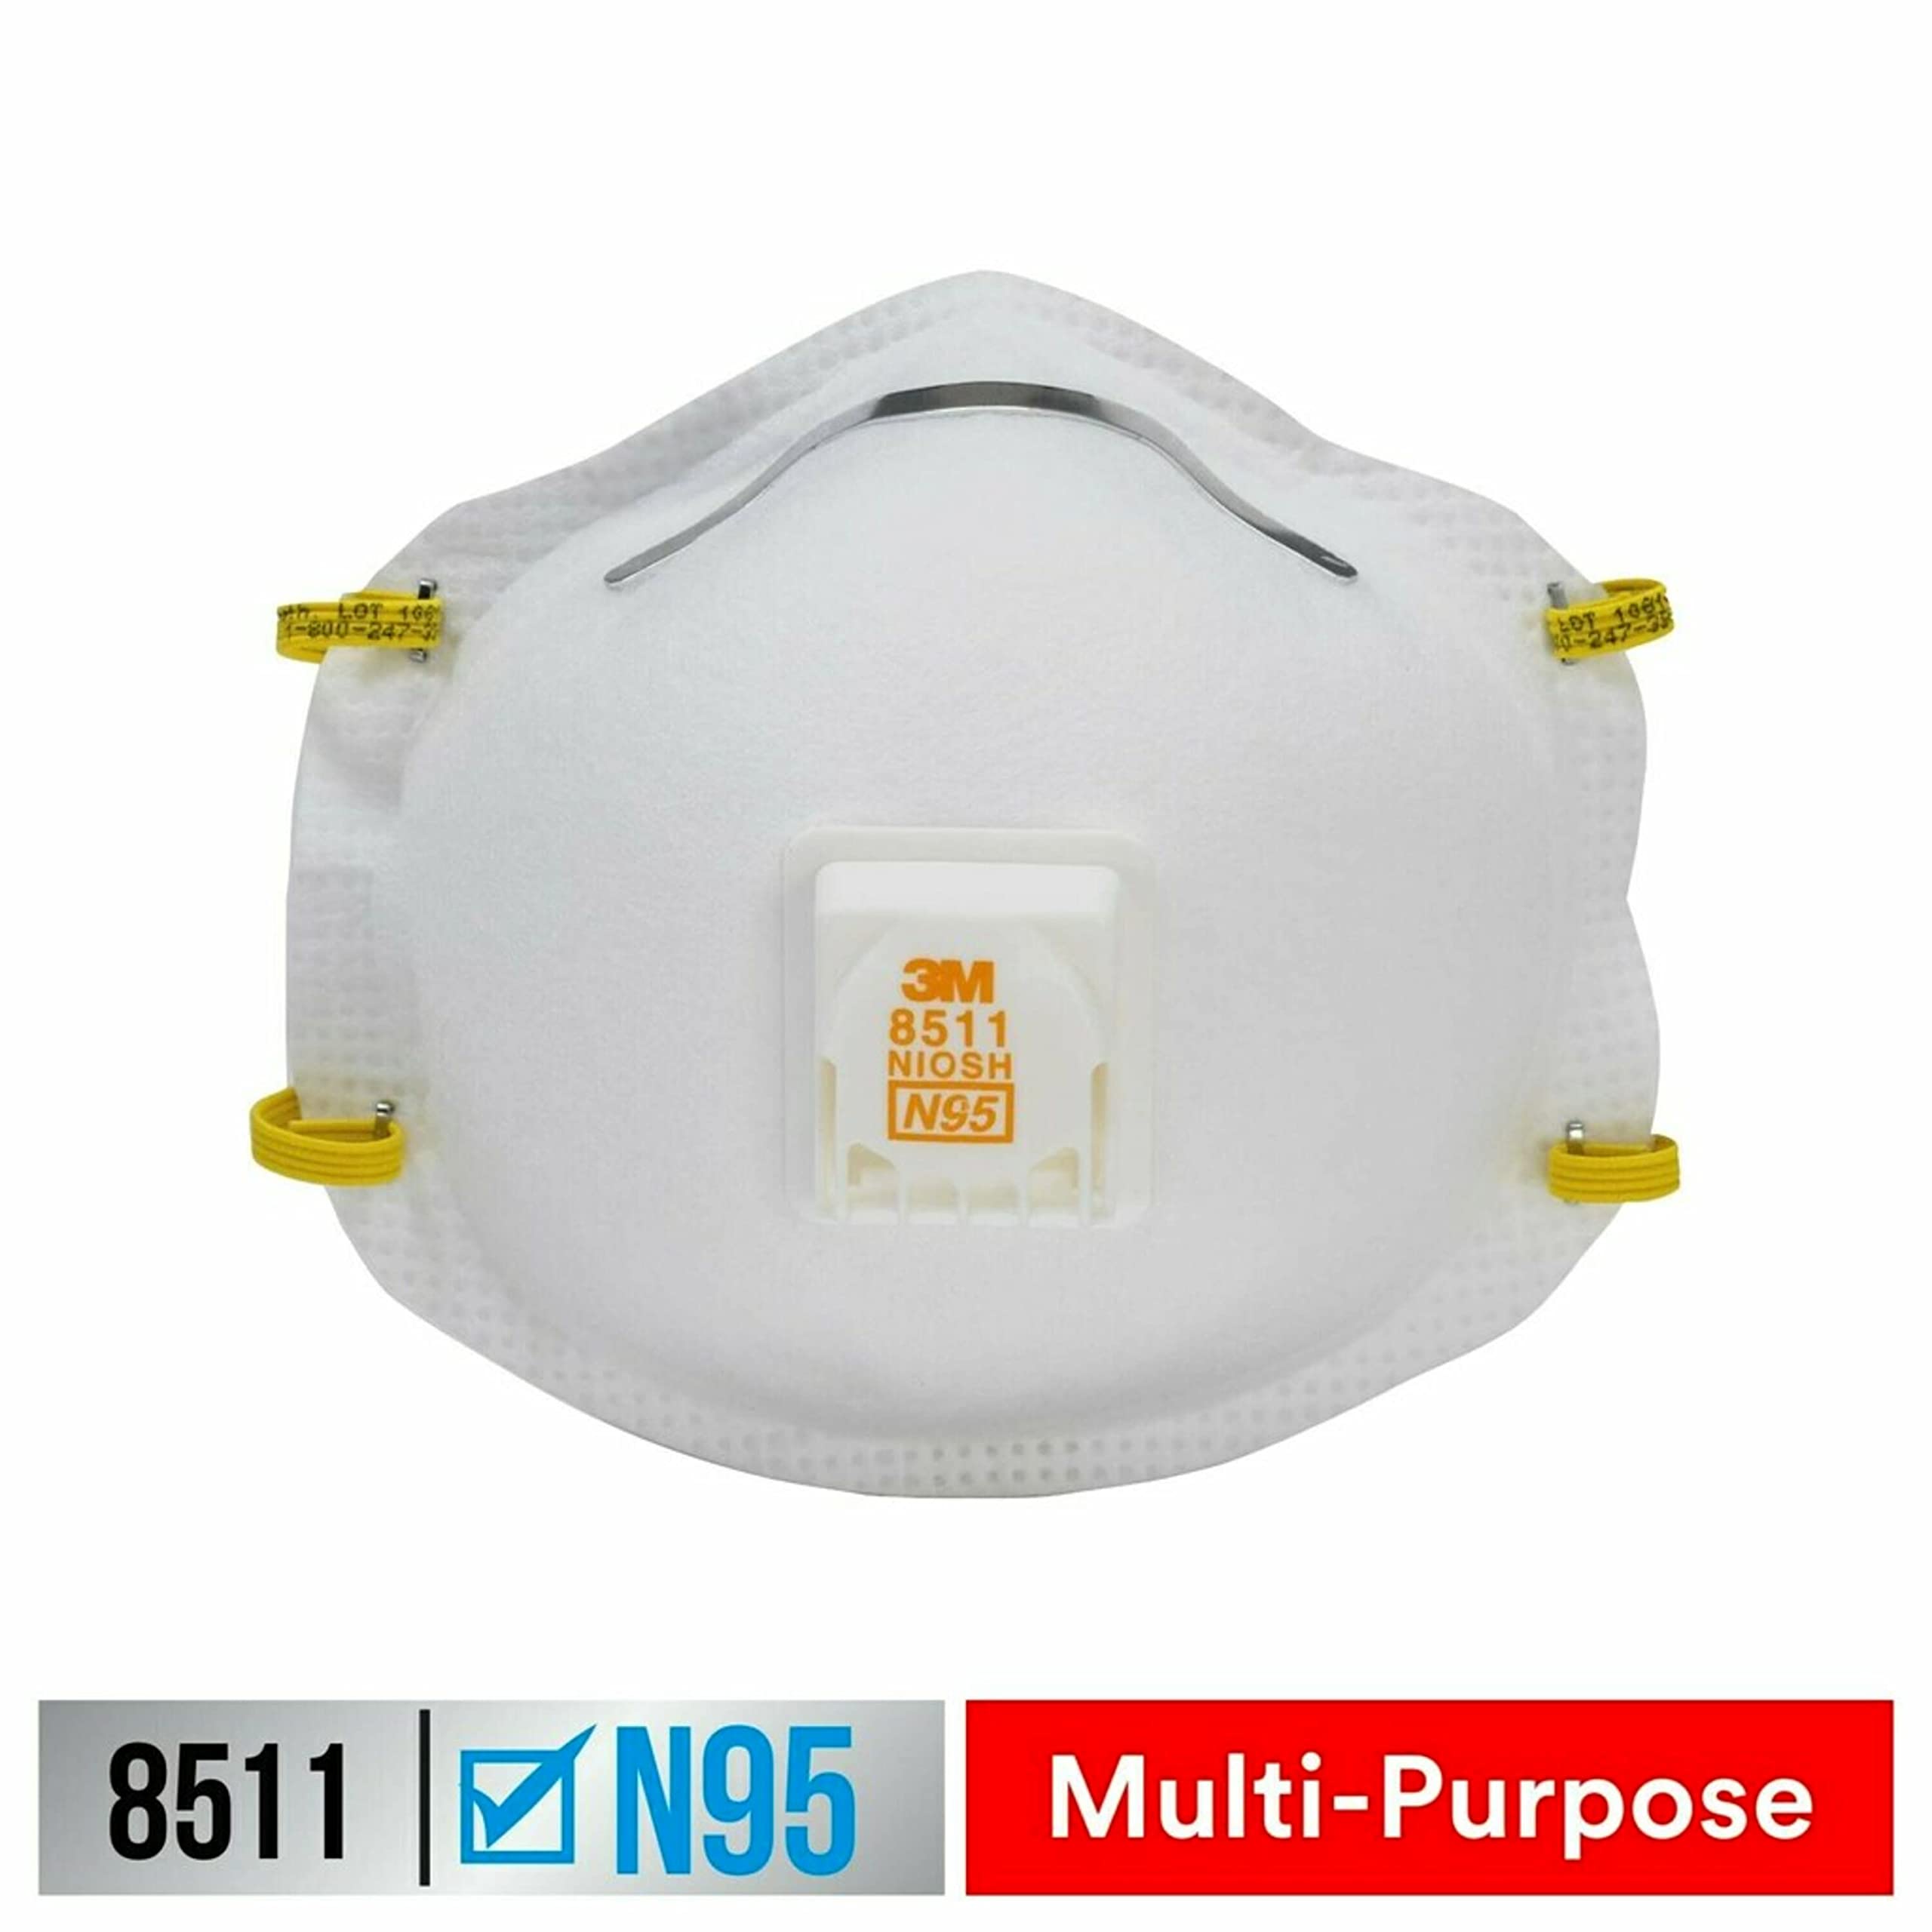 3M Respirator for Sanding, Fiberglass, Drywall, and Painting, Exhalation Valve Helps Direct Exhaled Air Downward